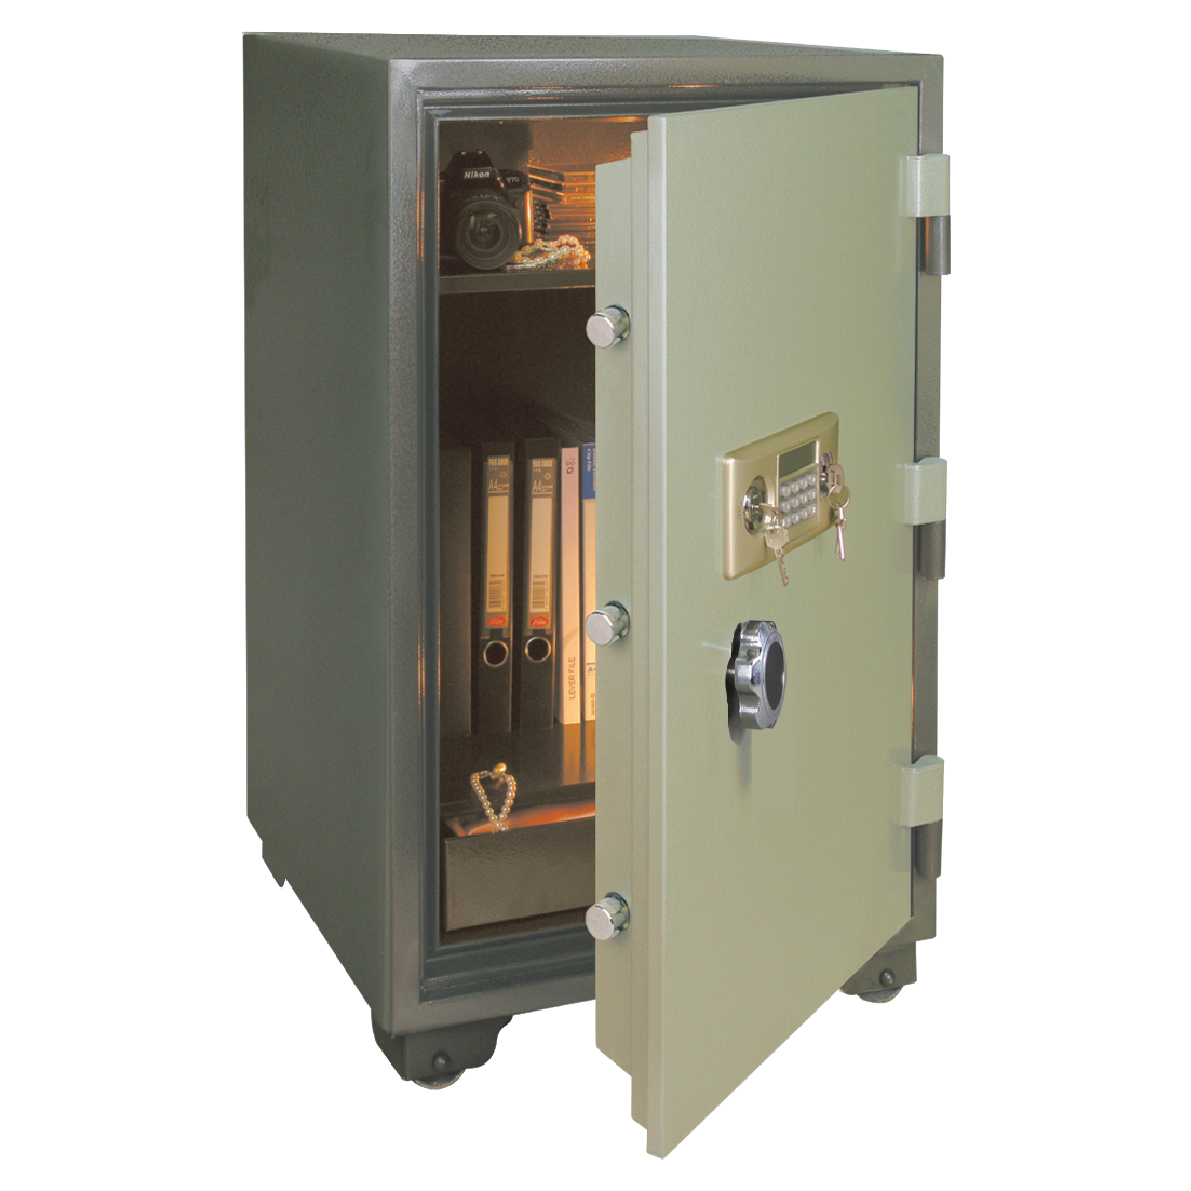 Lockwell ELectronic Fire Safe, YB920ALD